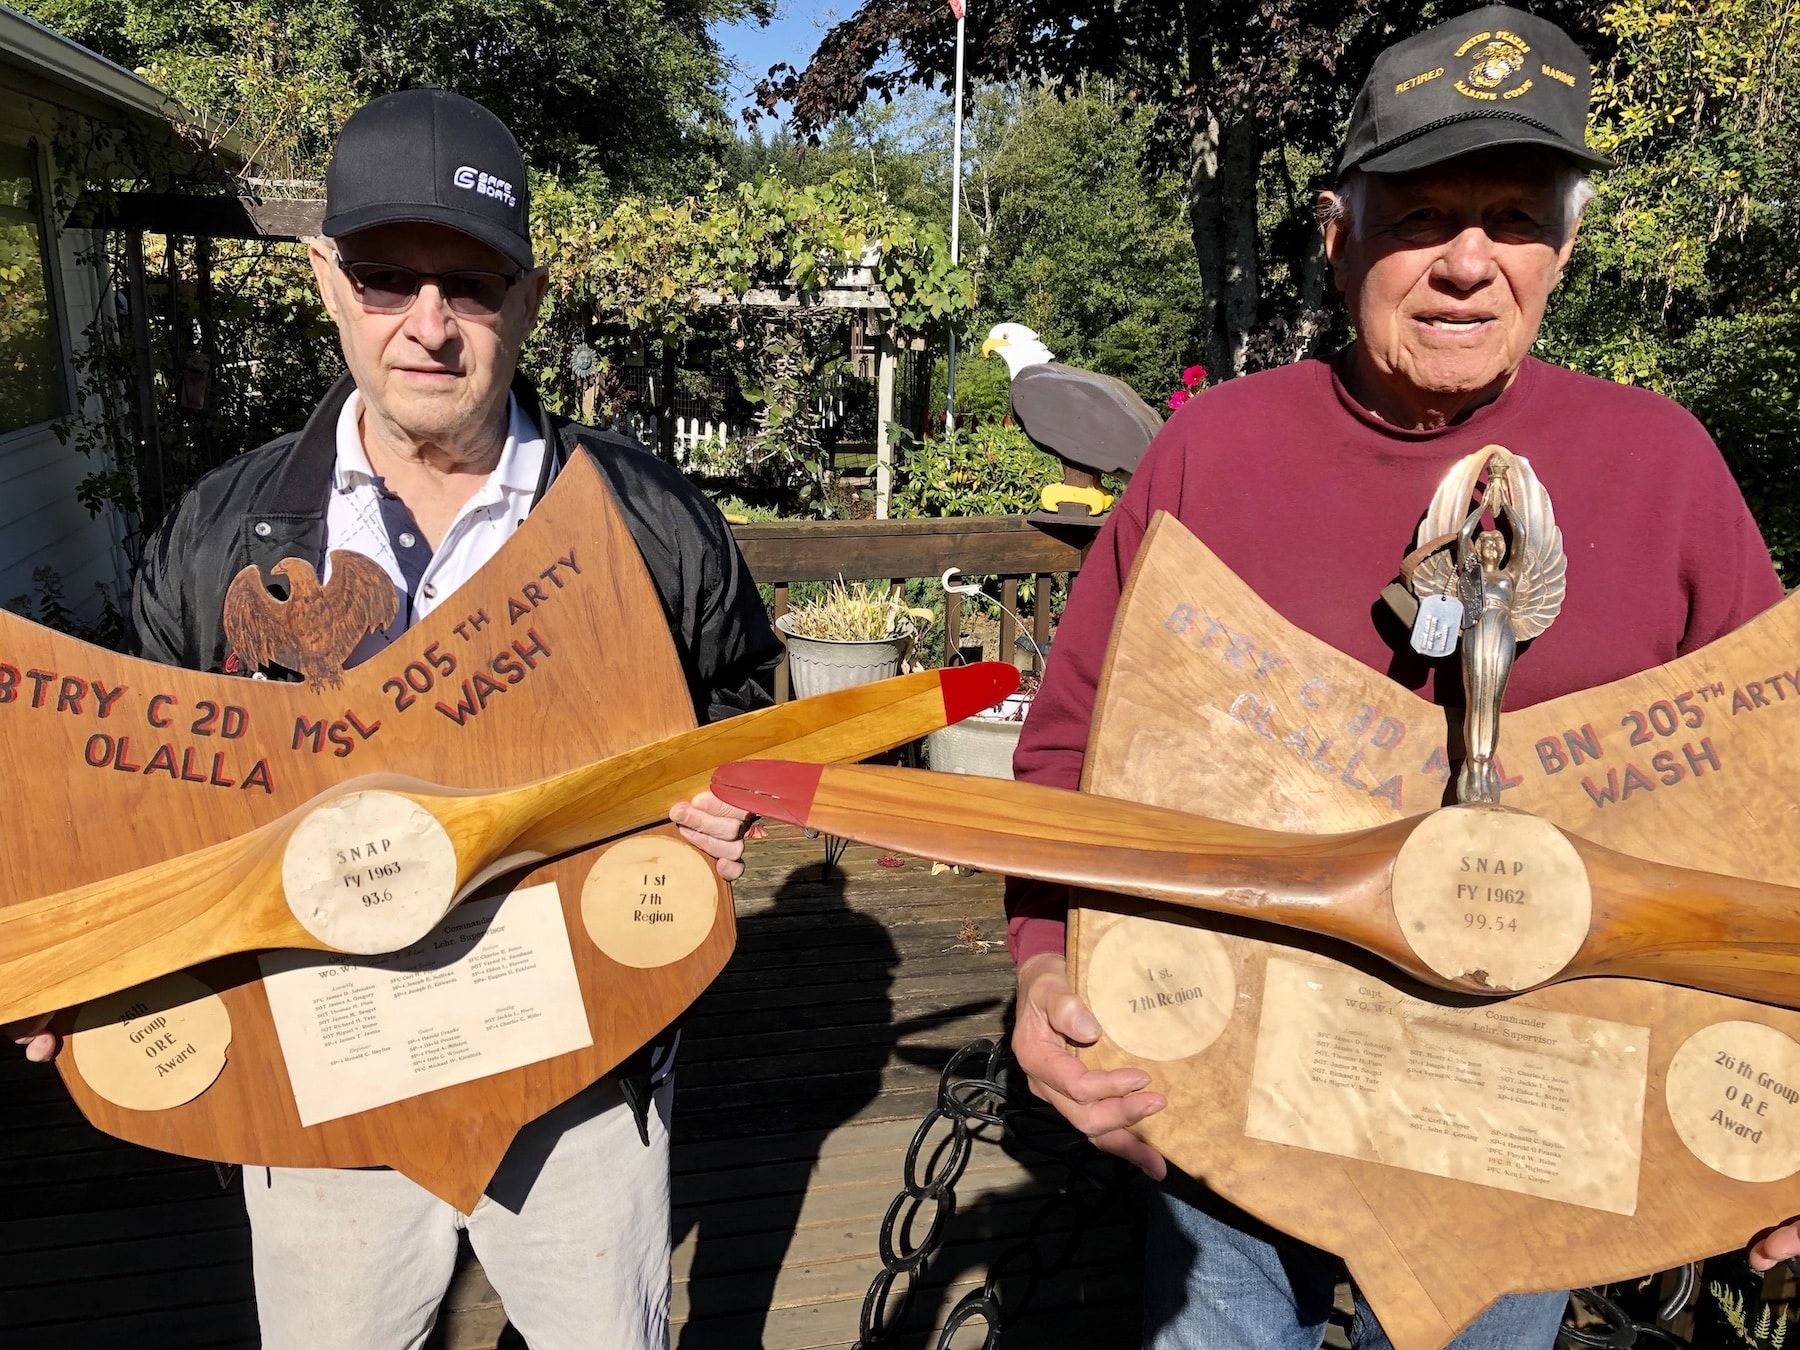 Carl Tinker, left, and Vince Romo hold trophies that the Olalla Nike team won at annual firing exercises in New Mexico. The propellers are from drones that the missiles blew up.